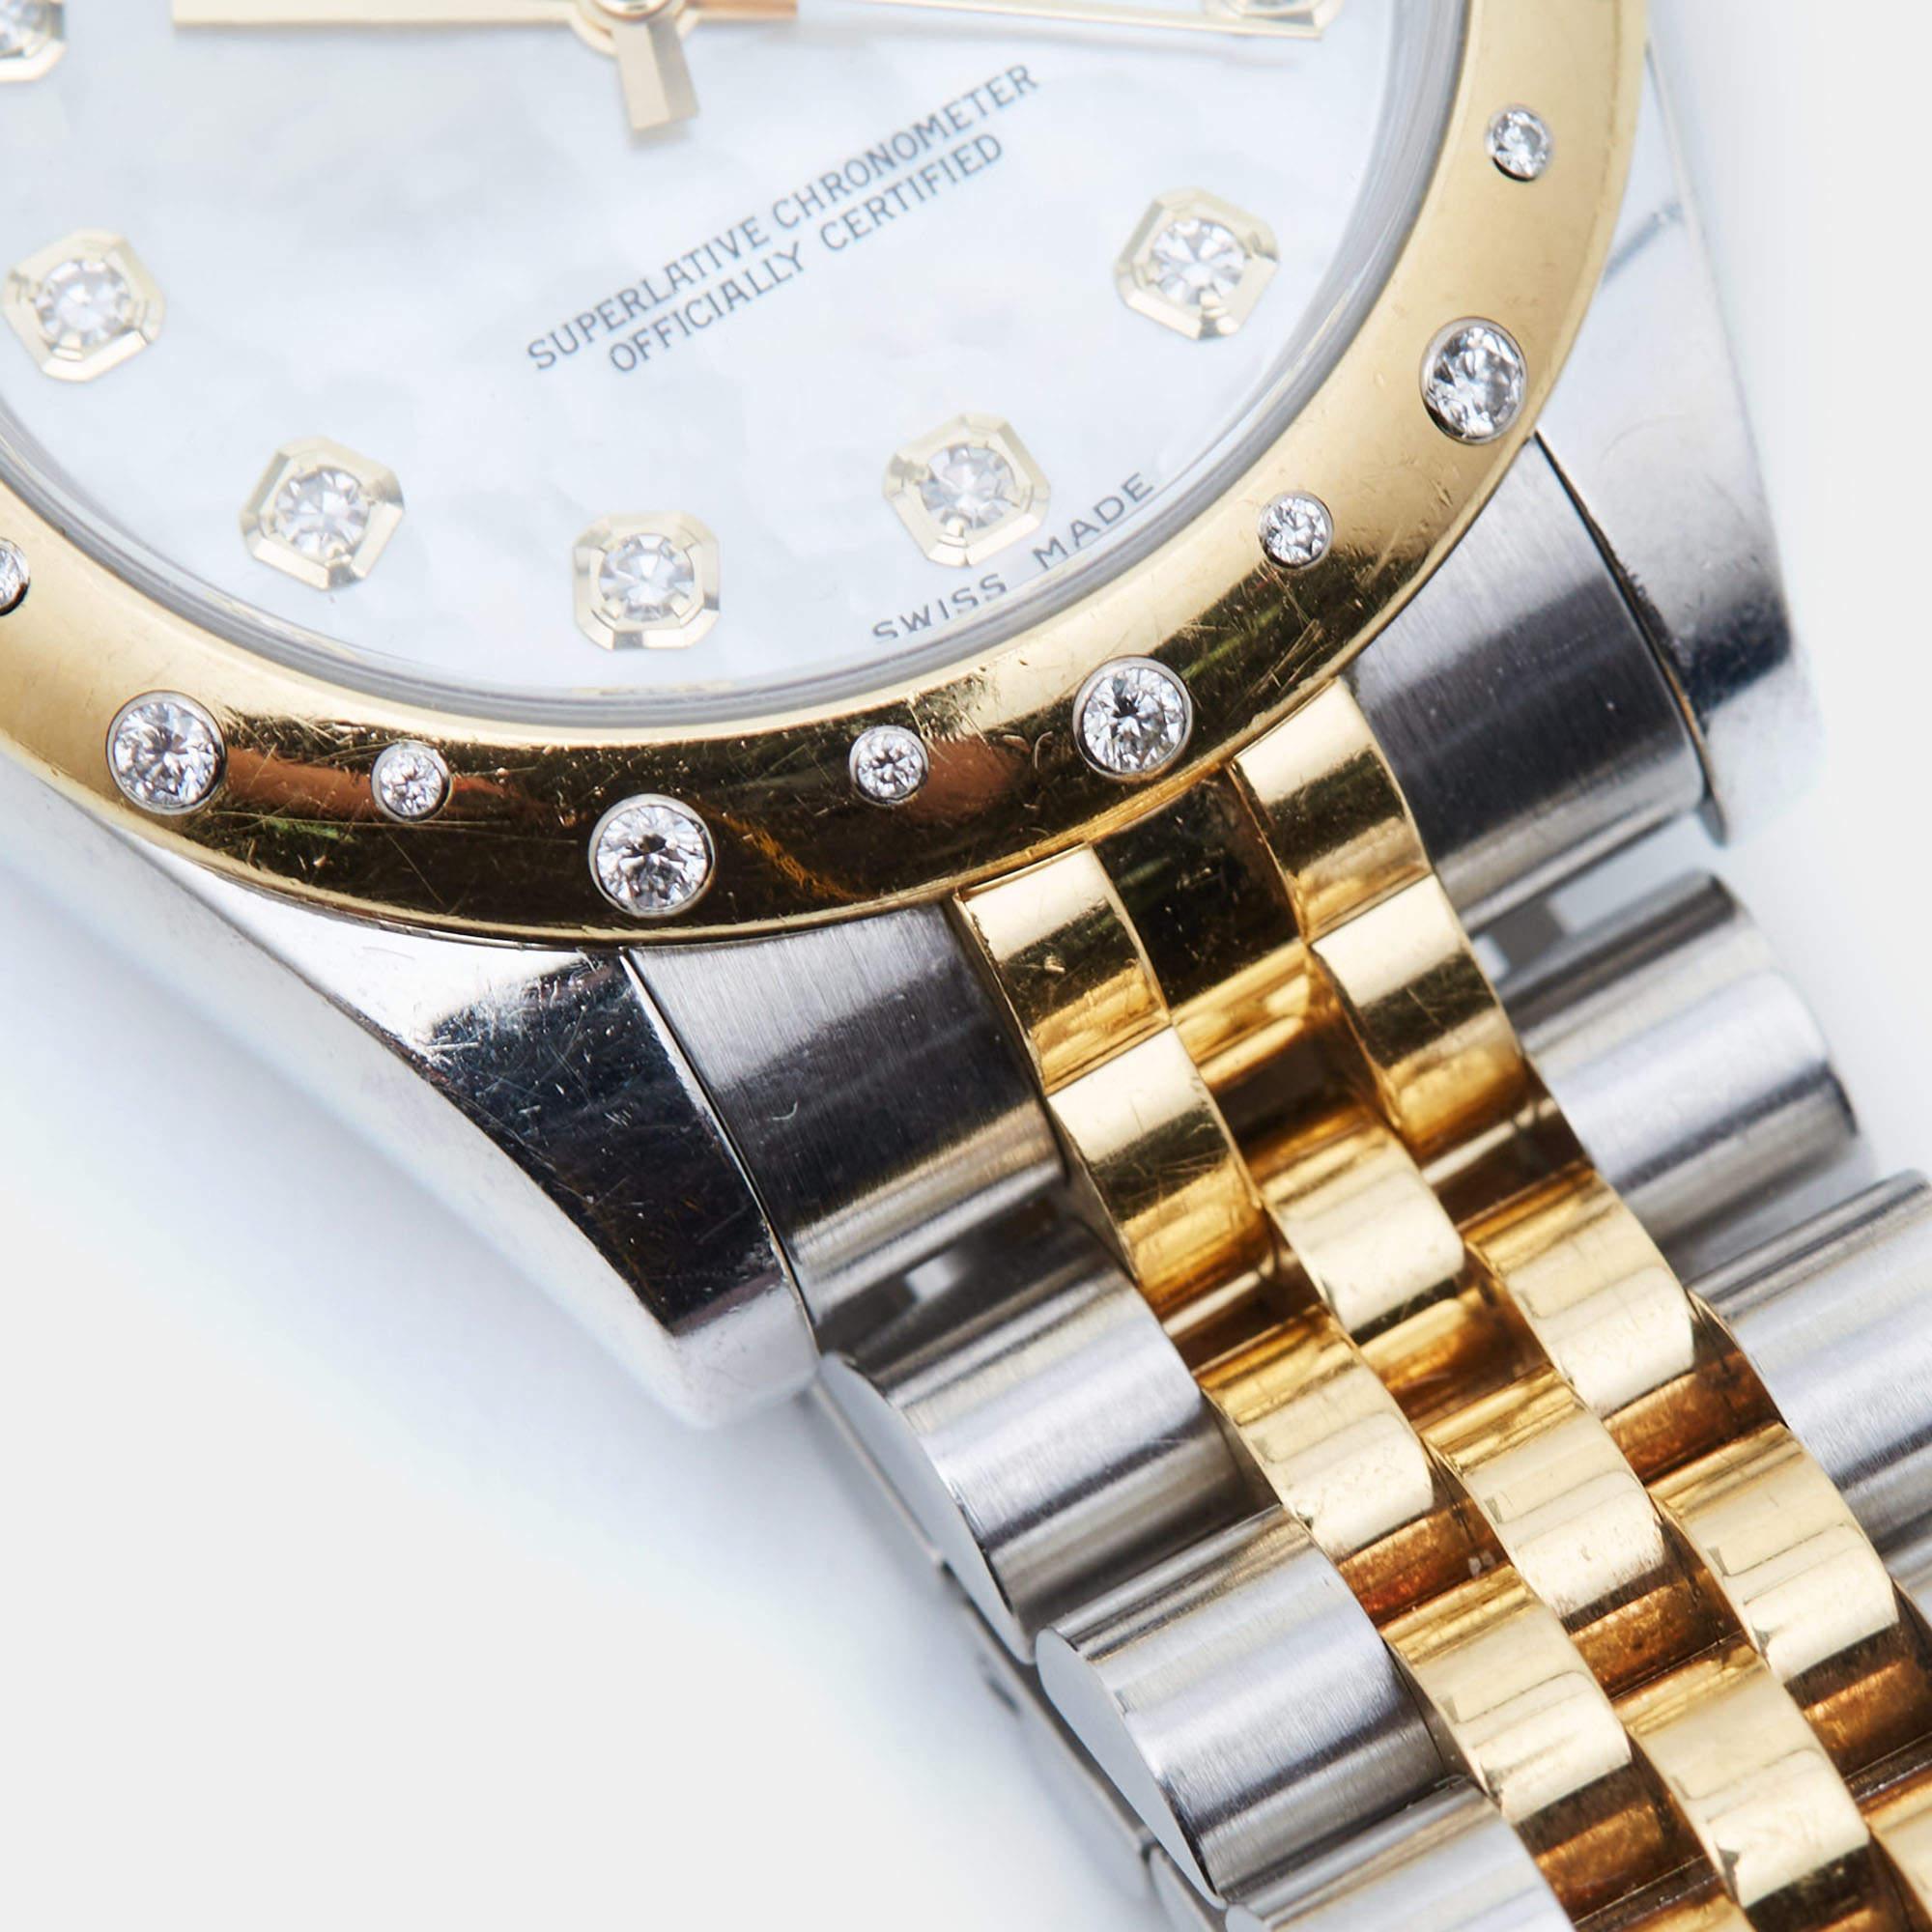 This beautiful Rolex Datejust for women will be a fine investment. Crafted using stainless steel and 18k yellow gold, the automatic watch features a mother-of-pearl dial set with diamond hour markers, a date window, and three hands. More diamonds